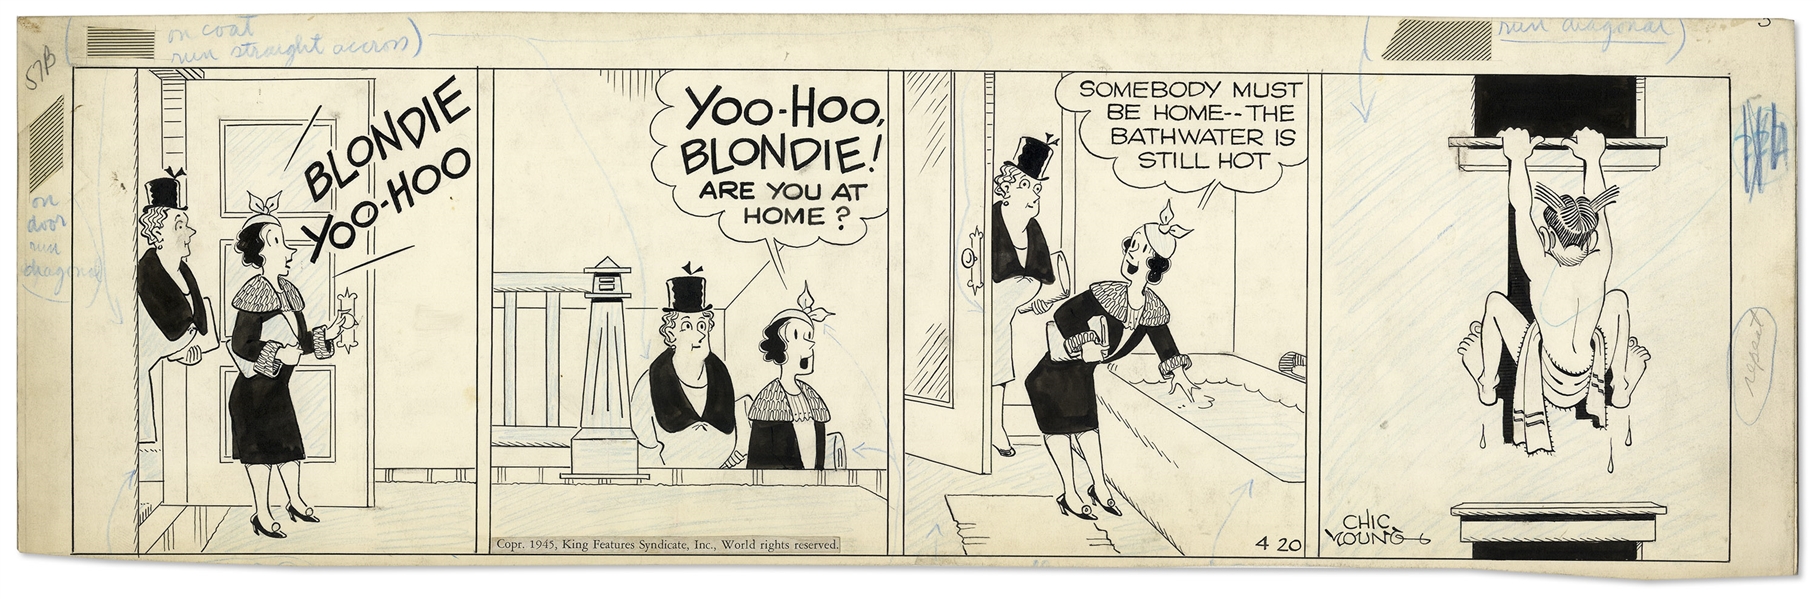 Chic Young Hand-Drawn ''Blondie'' Comic Strip From 1945 Titled ''The Private Life Of A Goldfish''